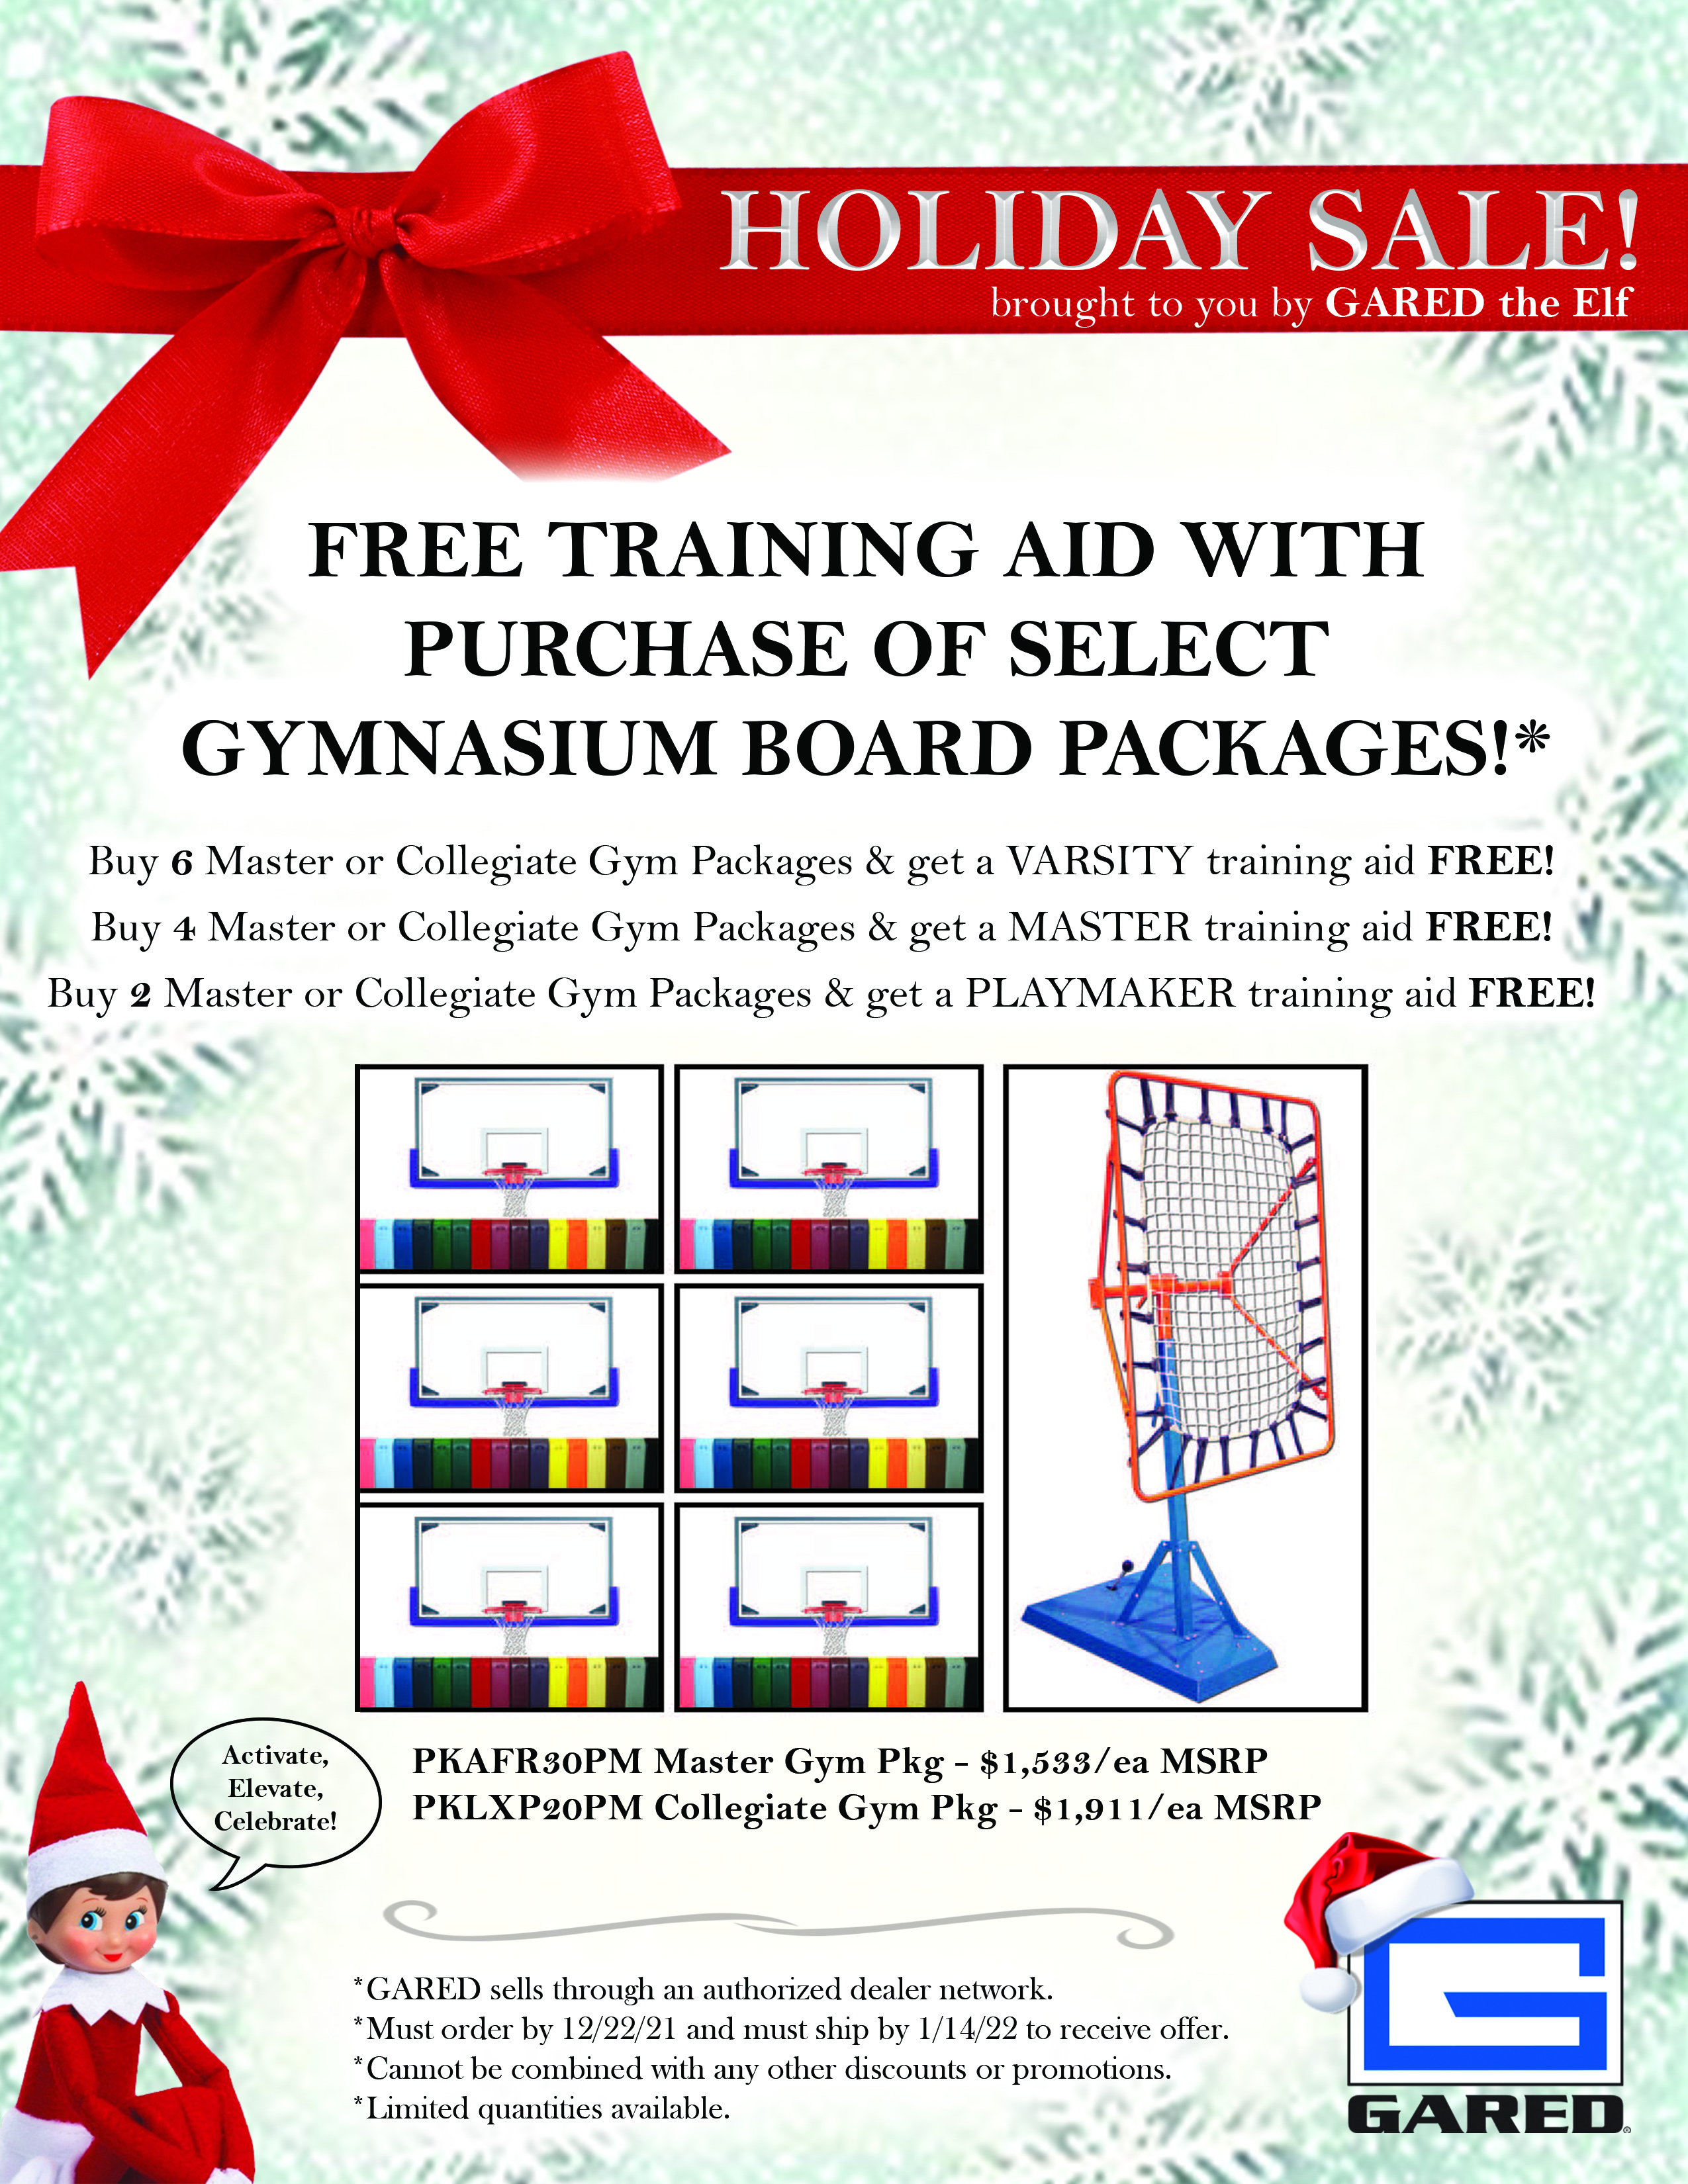 Elf Sale - Free Training Aid with Glass Packages